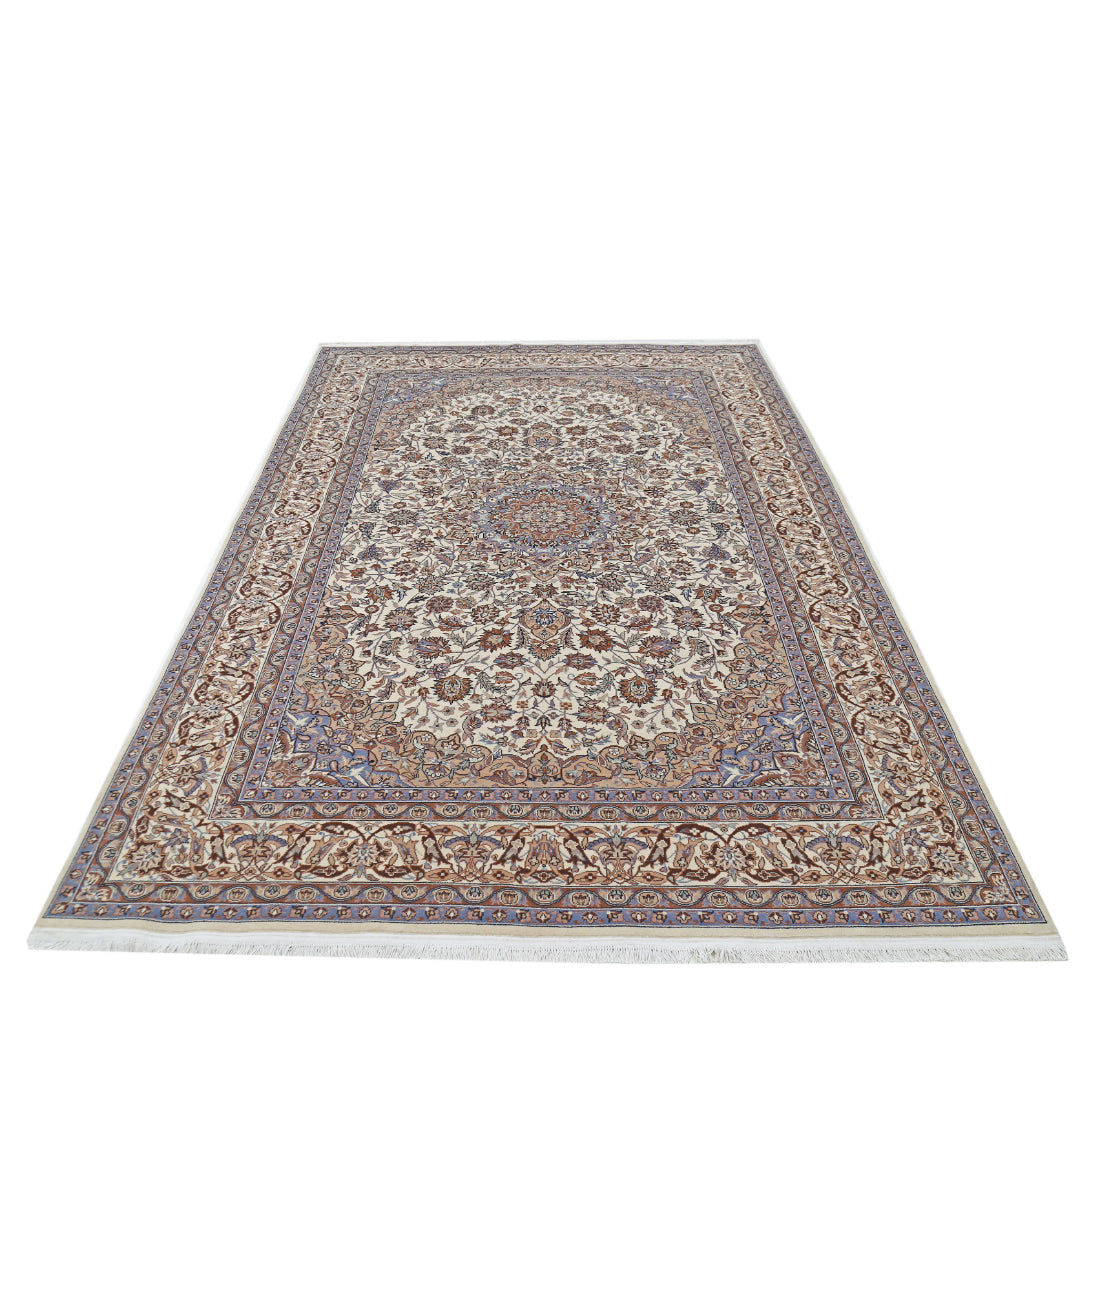 Hand Knotted Heritage Persian Style Wool Rug - 6'1'' x 9'0'' 6'1'' x 9'0'' (183 X 270) / Ivory / Blue